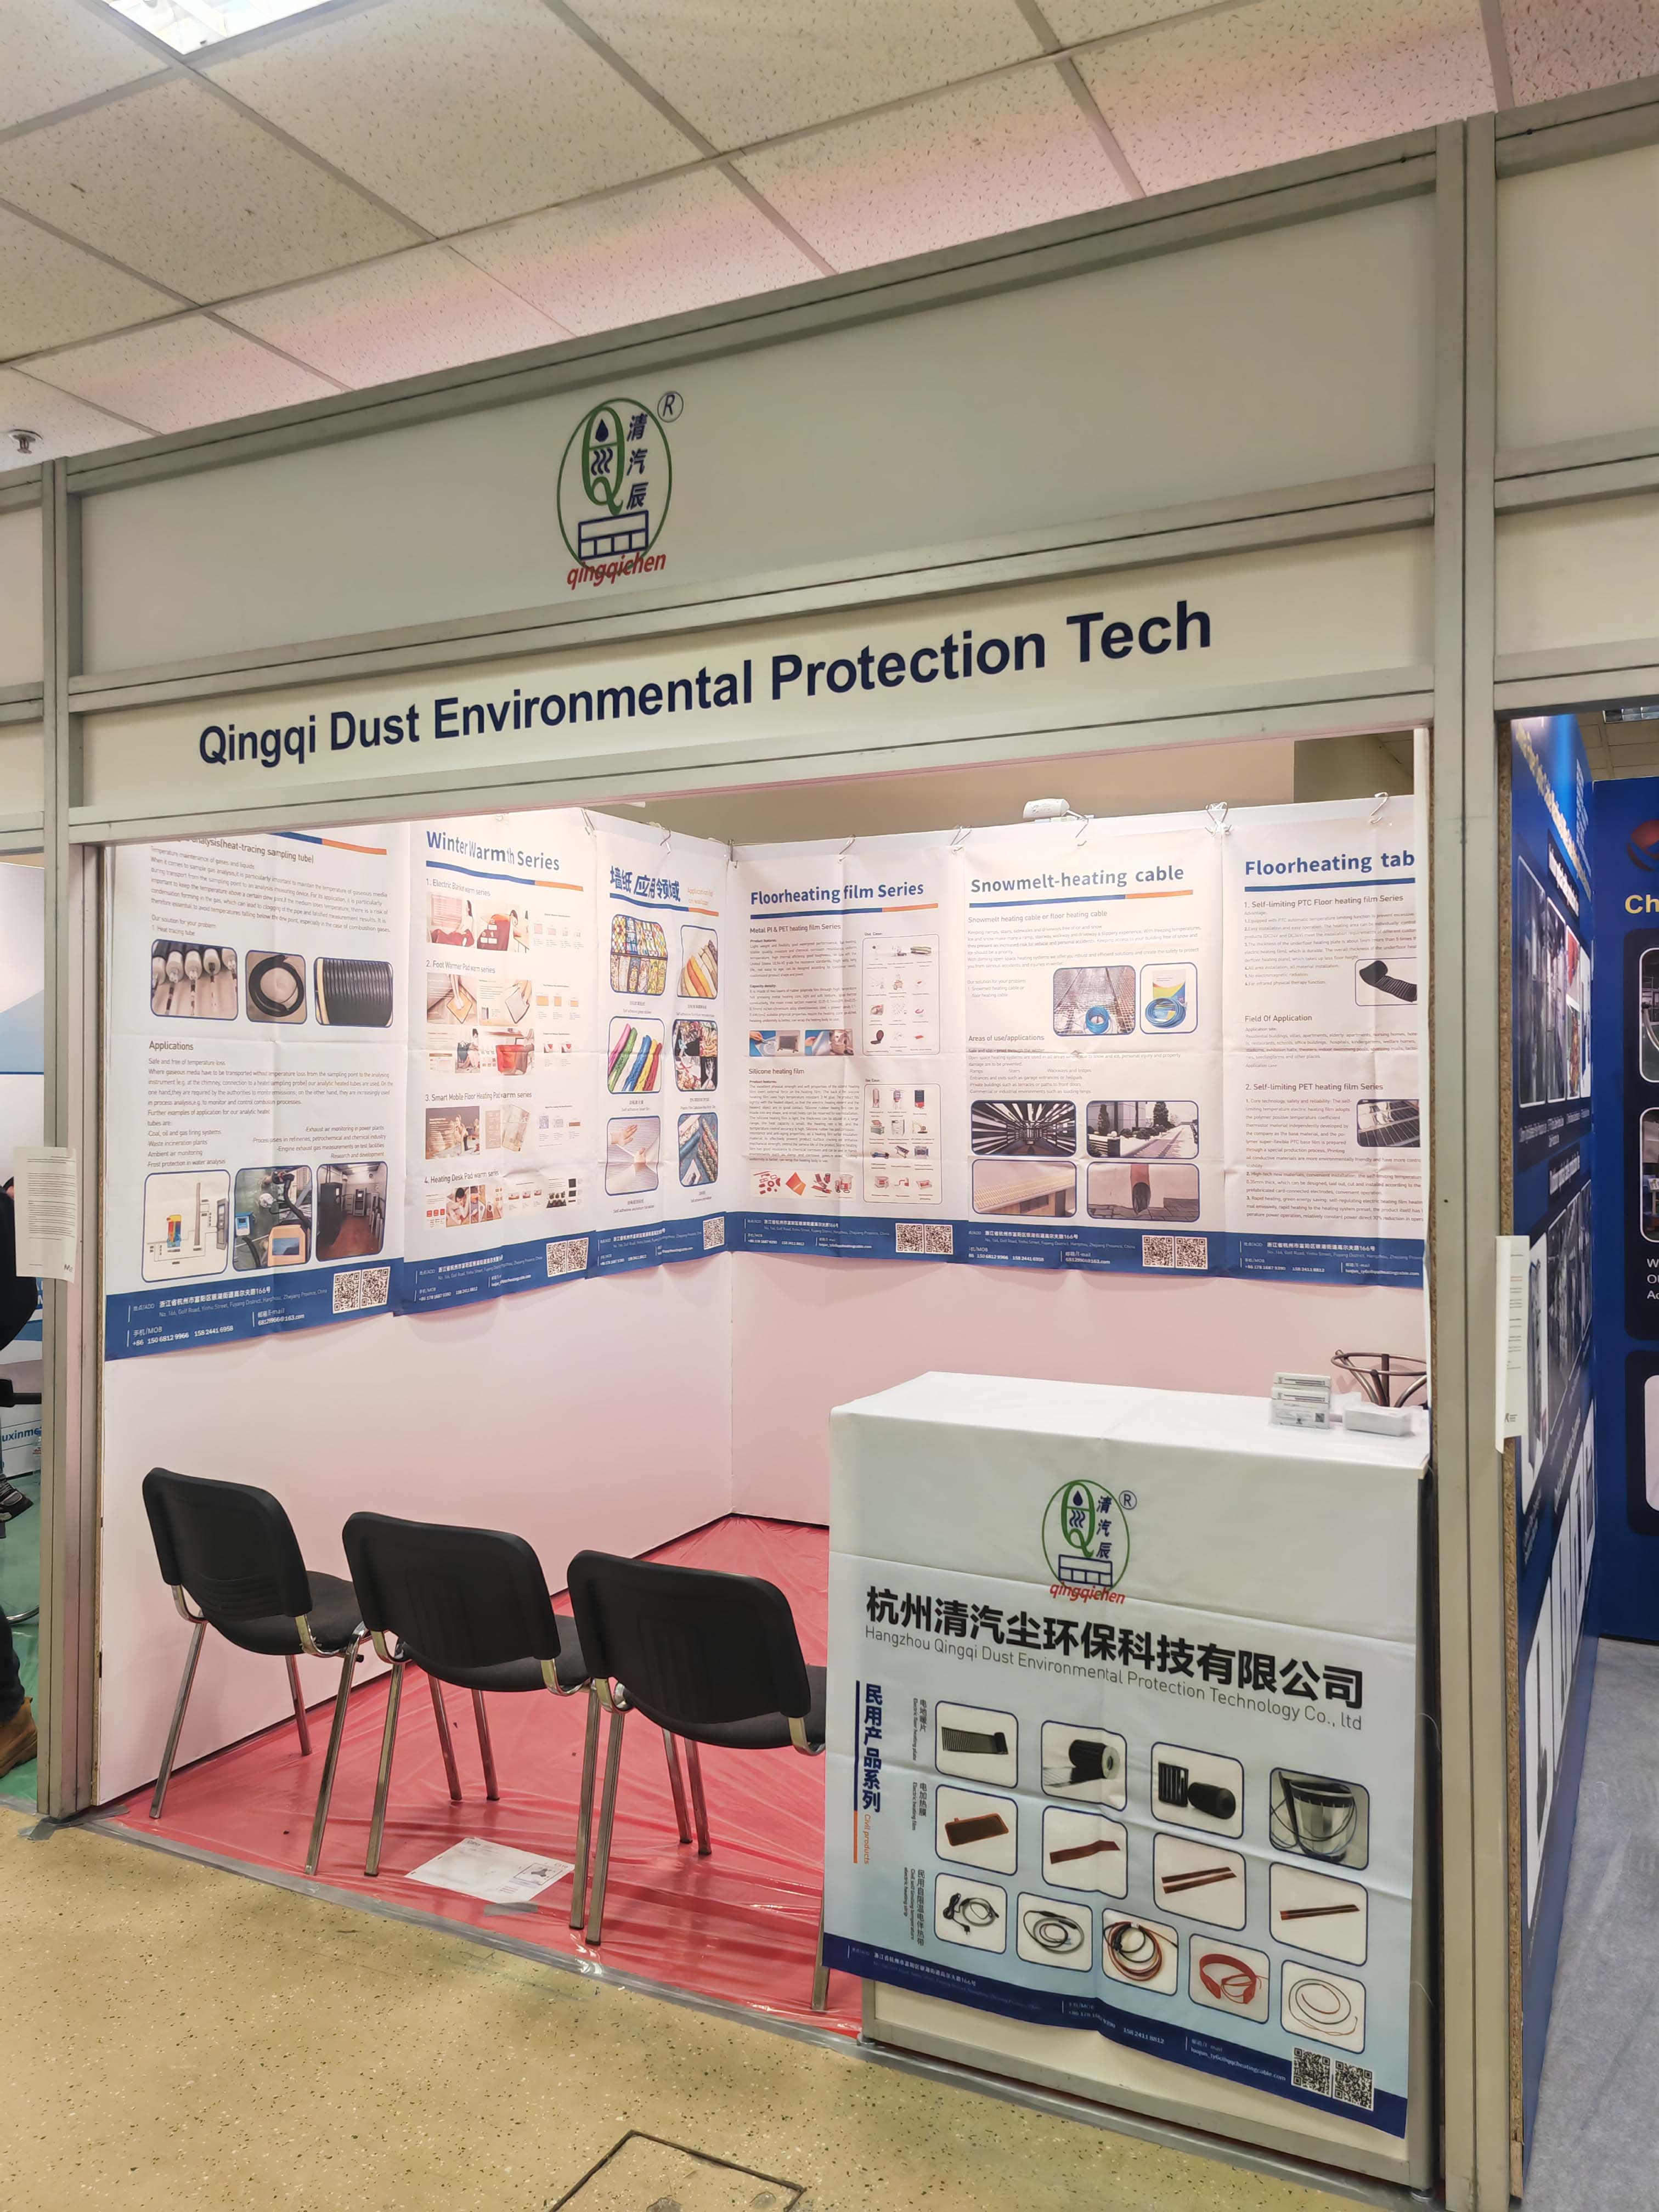 Hangzhou Qingqi Dust Environmental Protection Technology Co., Ltd. in March 19-21 CabeX exhibition in Moscow, Russia, welcome Russian friends to the exhibition to exchange and negotiate guidance